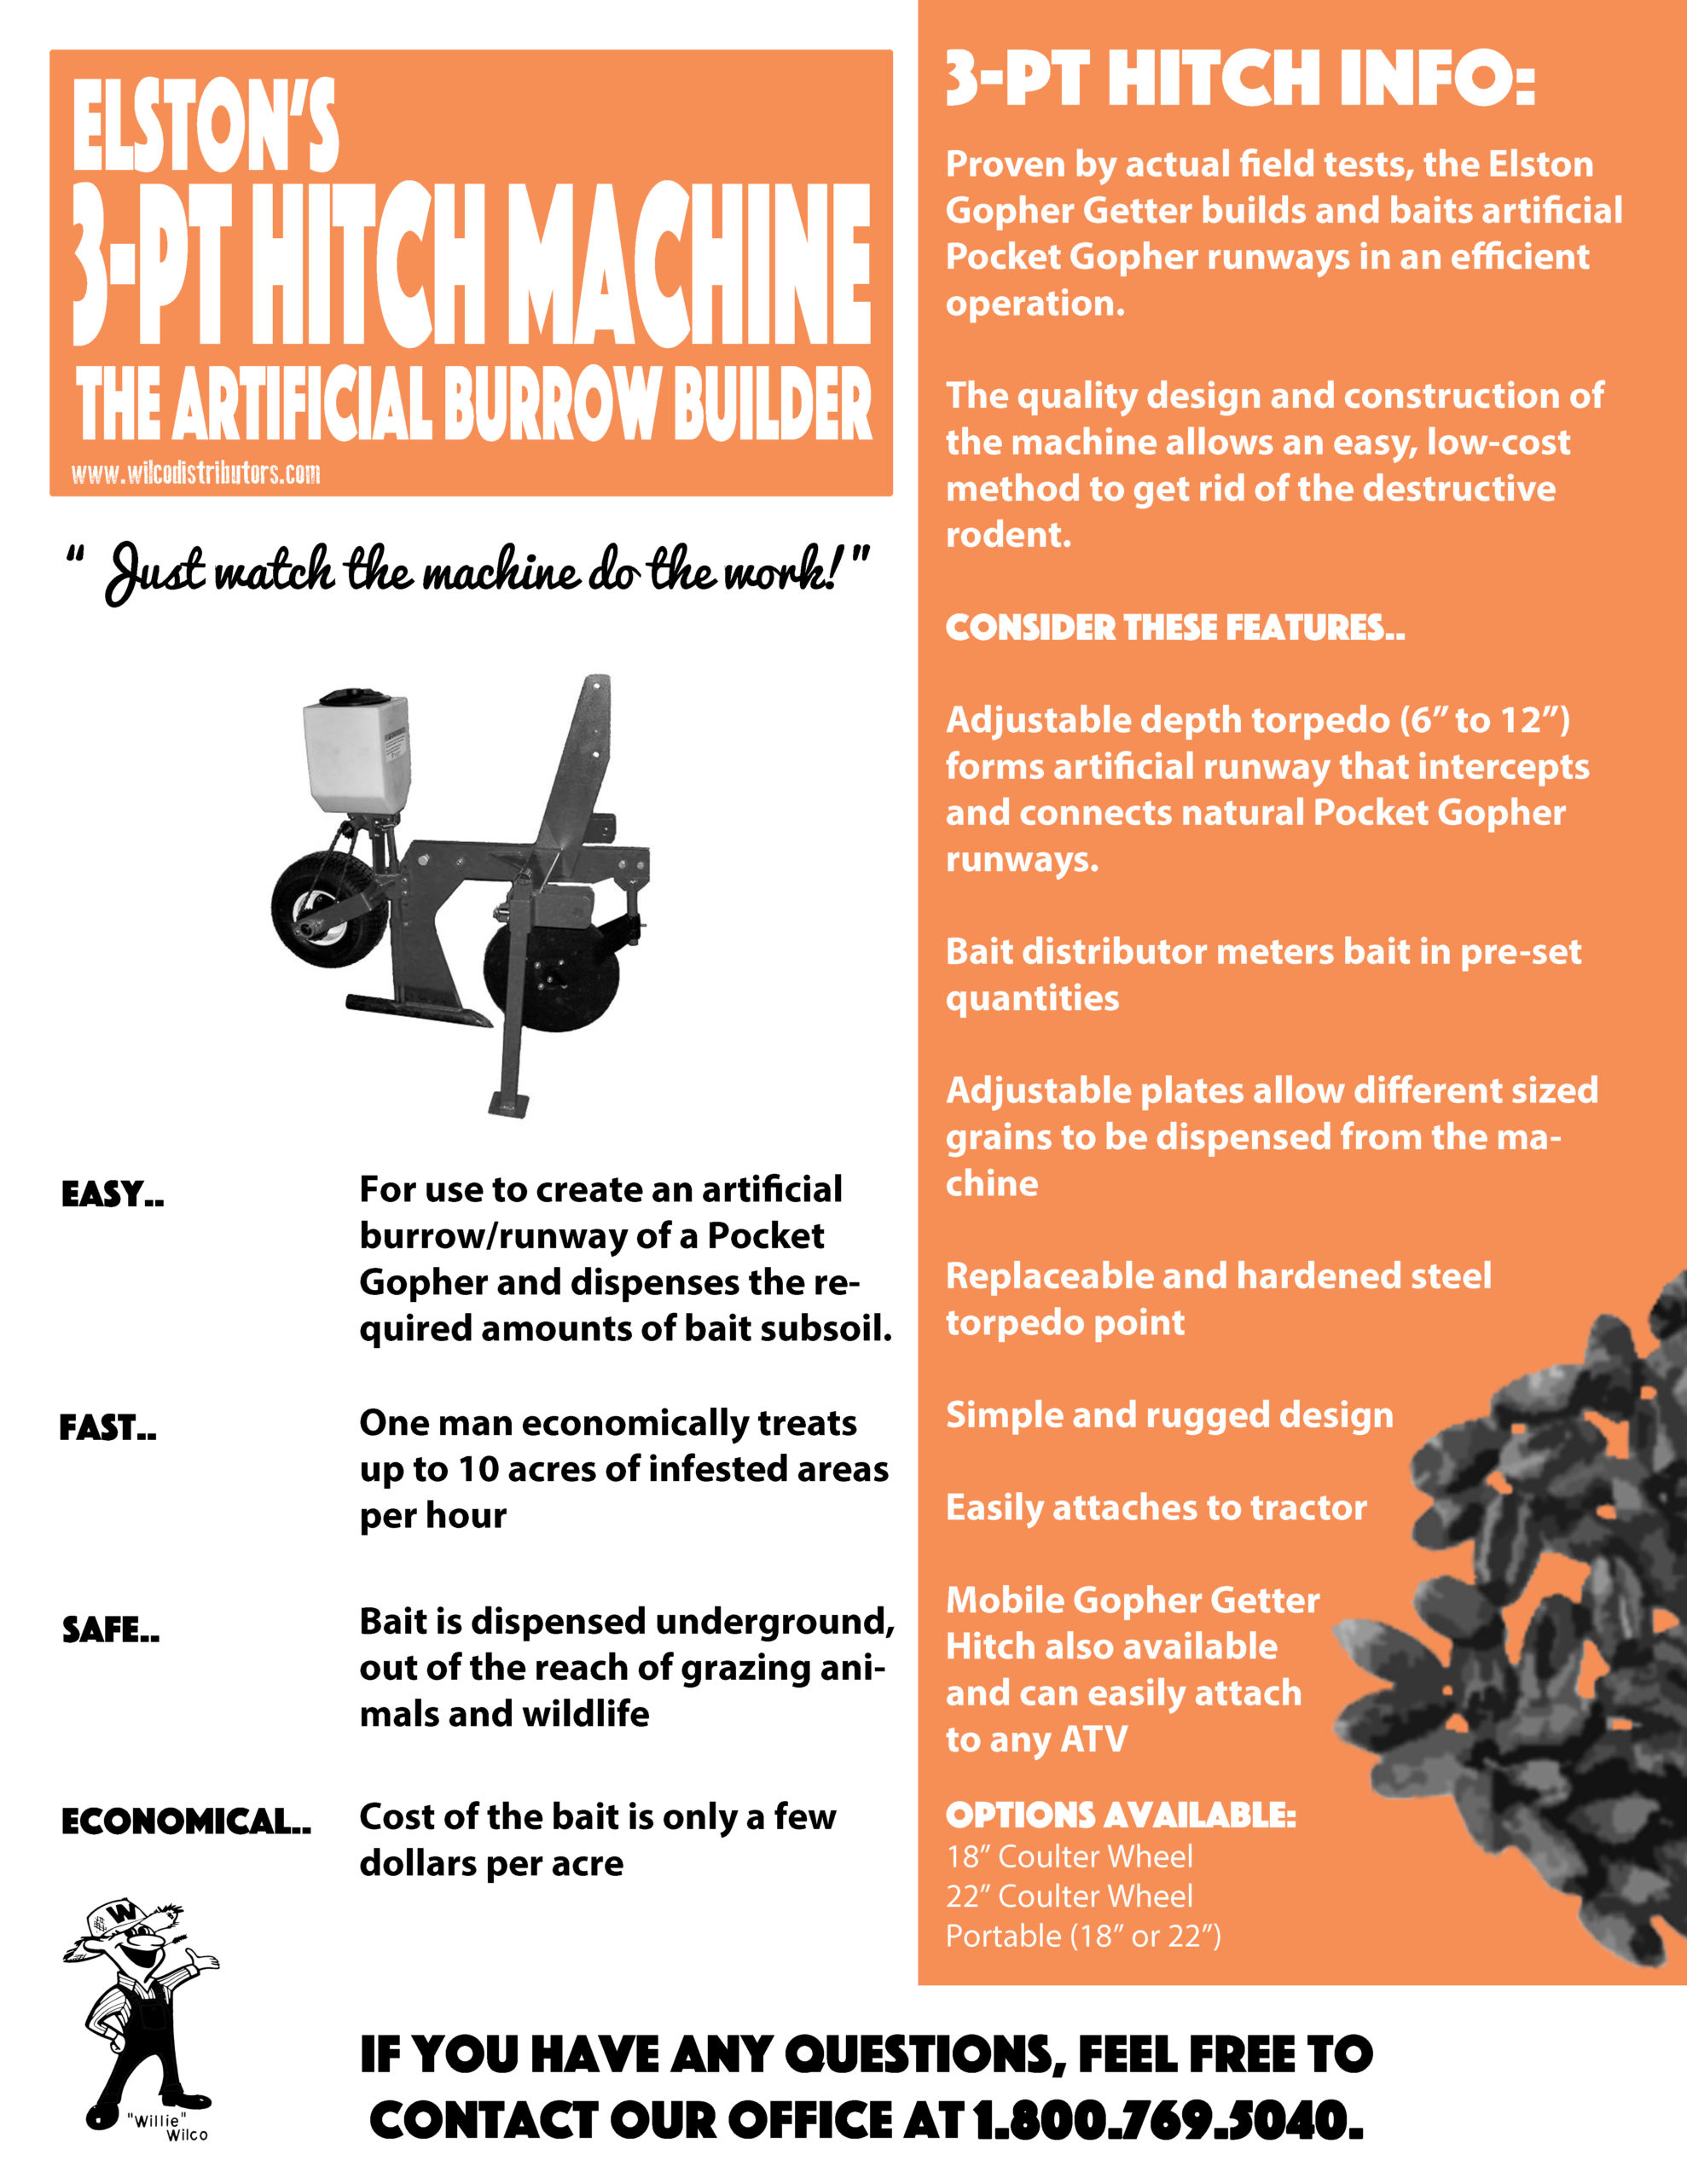 3 Point Hitch Machine: The Artificial Burrow Builder for Dispensing Gopher Bait